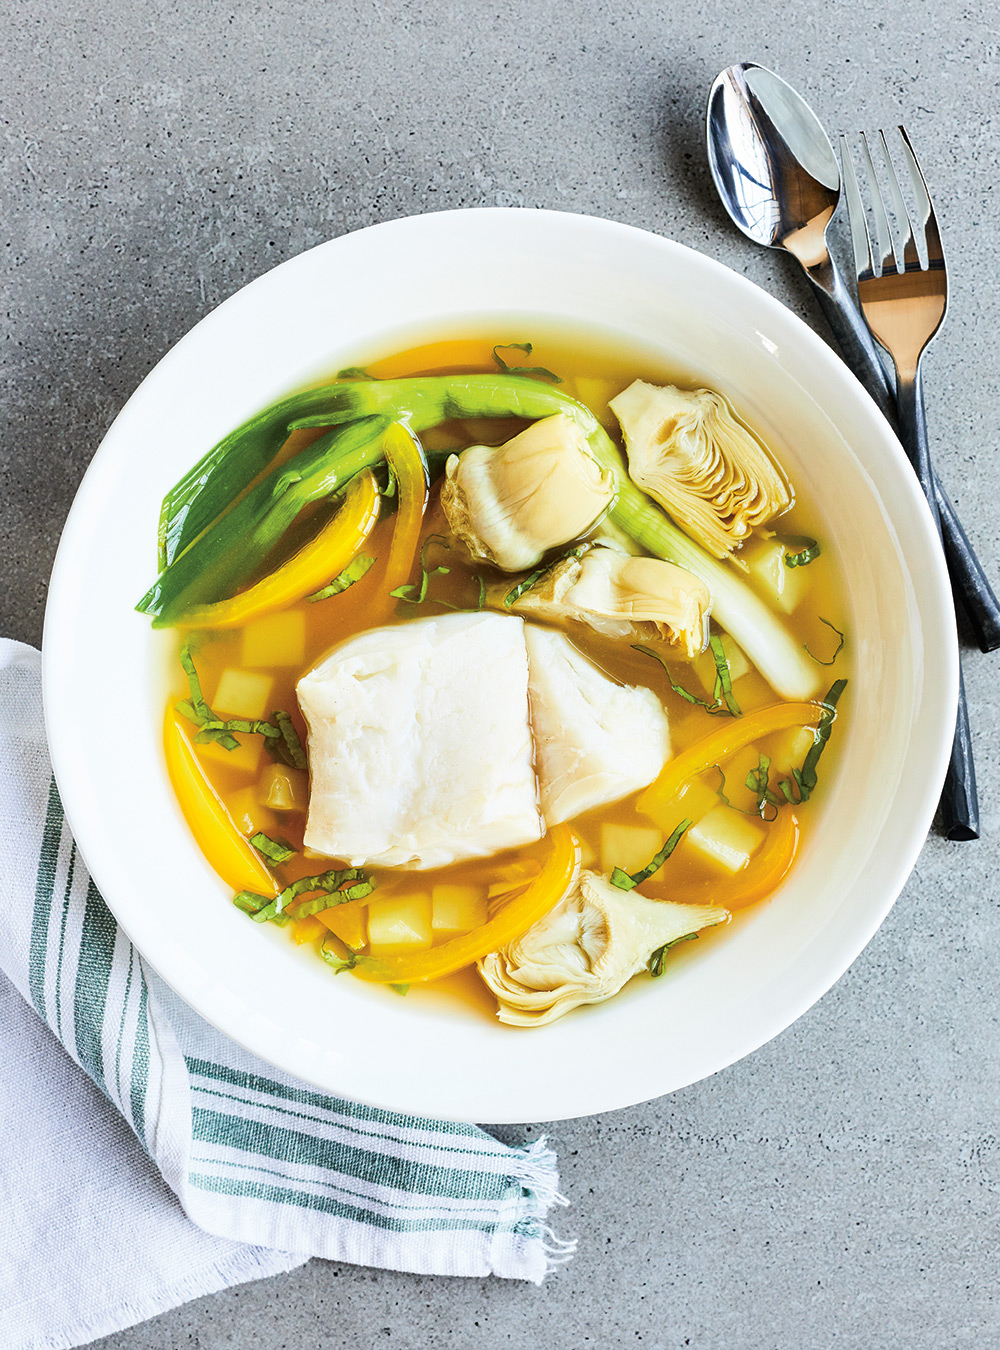 Poached Cod with Vegetables and Sorrel